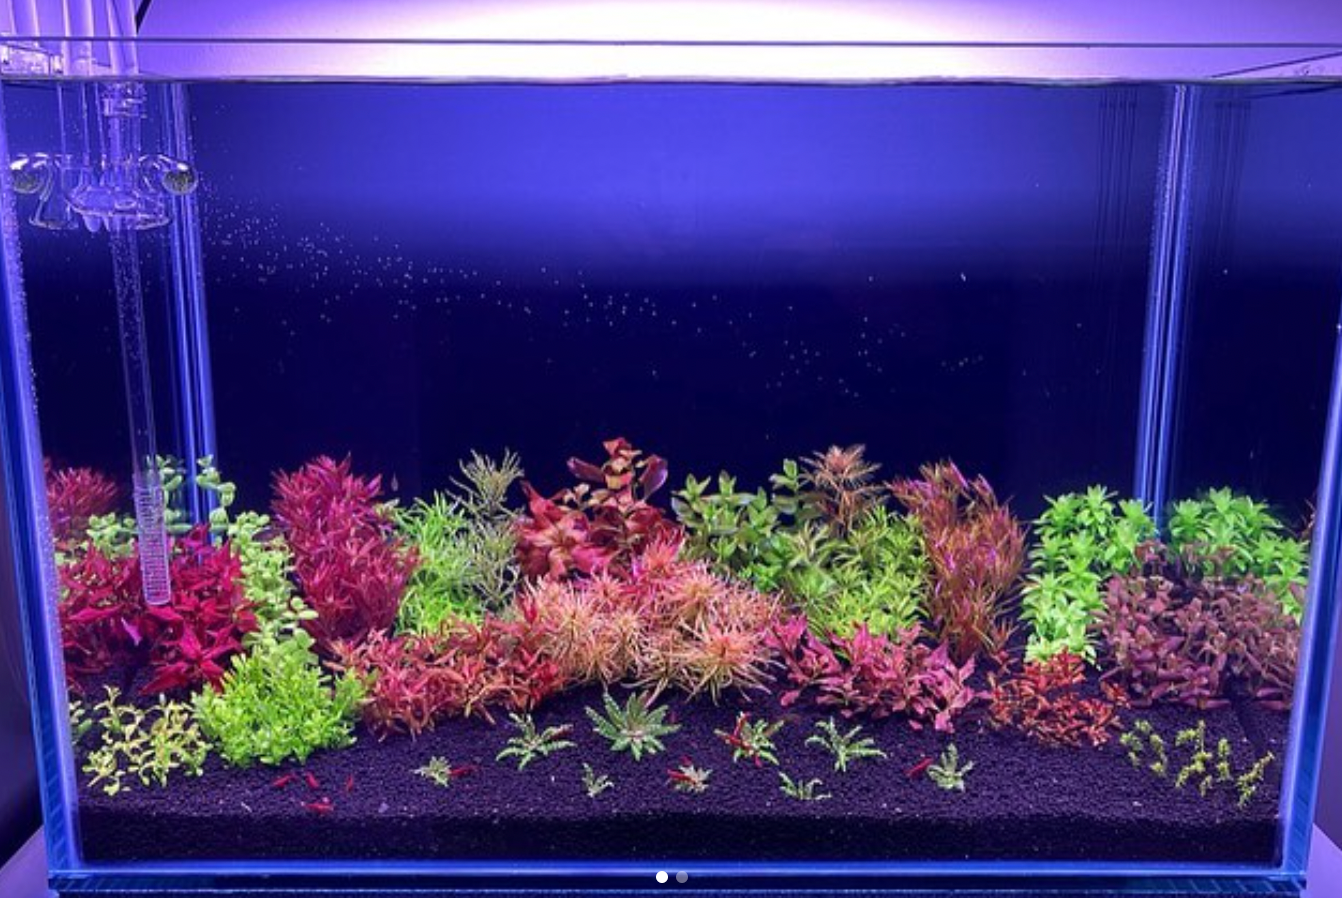 What Is Aquascaping?